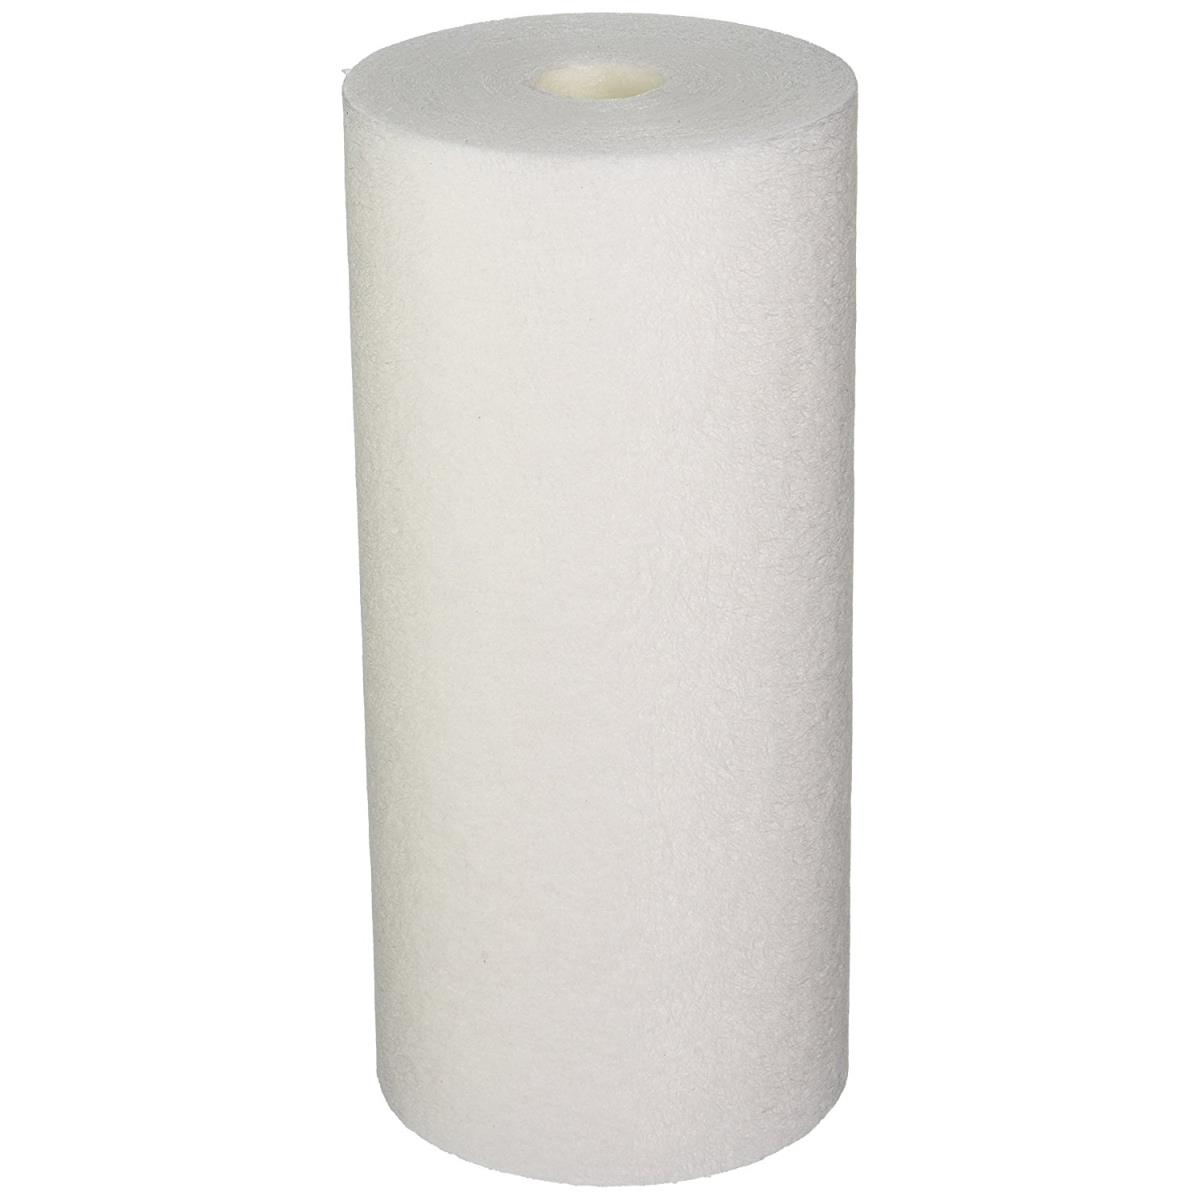 Flo-pro Whole House Water Filter Cartridge